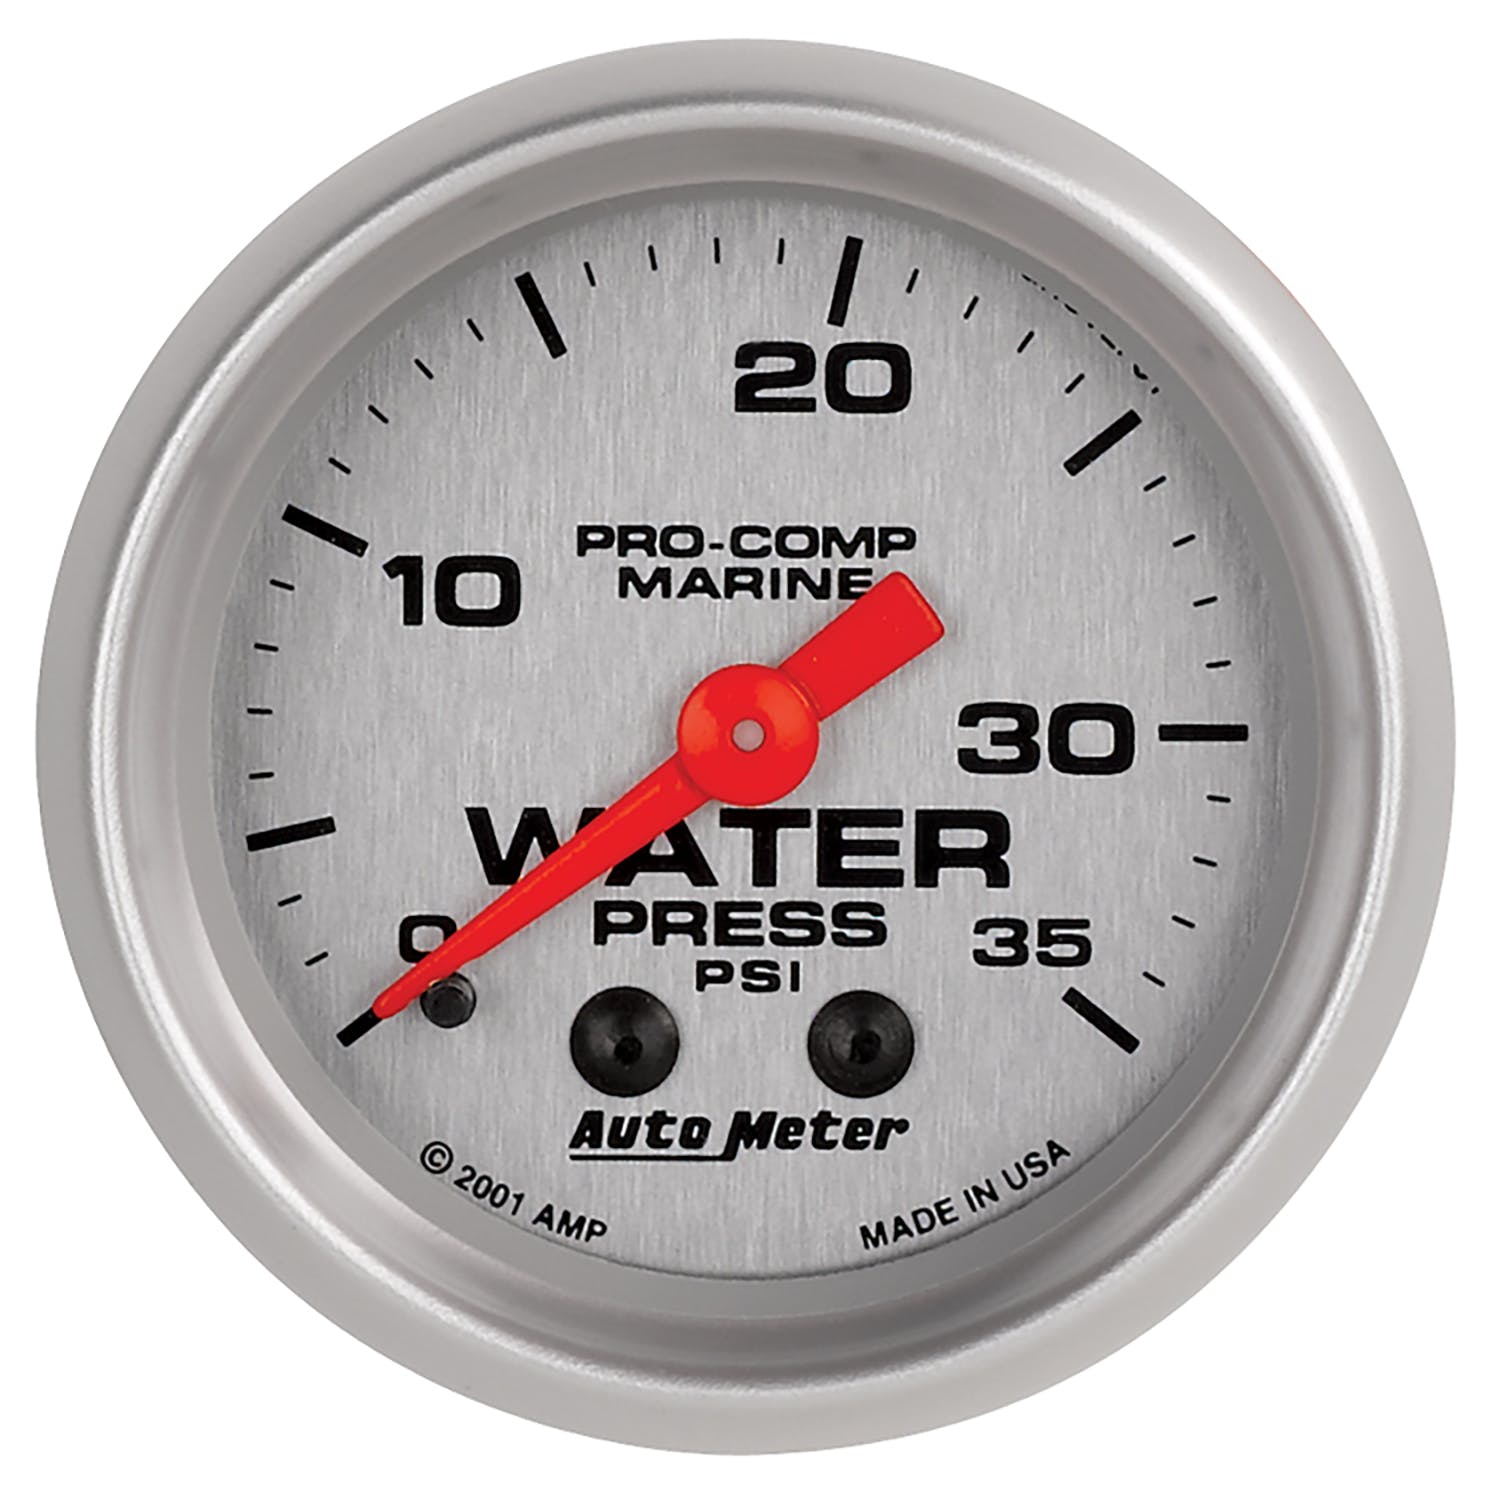 AutoMeter Products 200772-33 Marine Mechanical Water Pressure Gauge